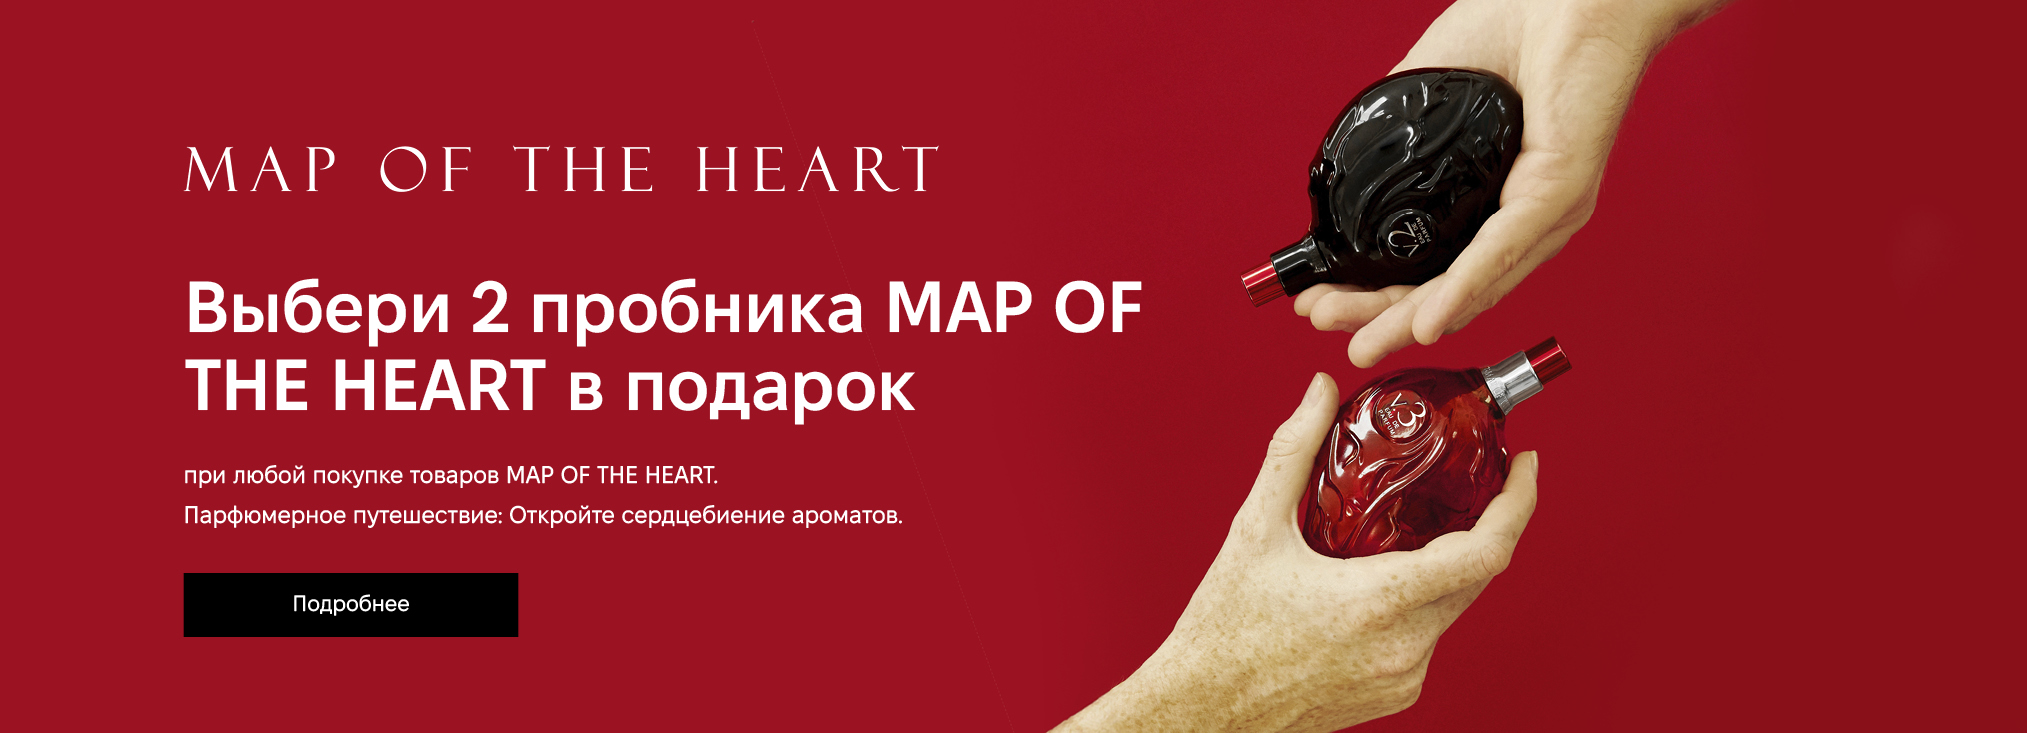 Map Of The Heart_3